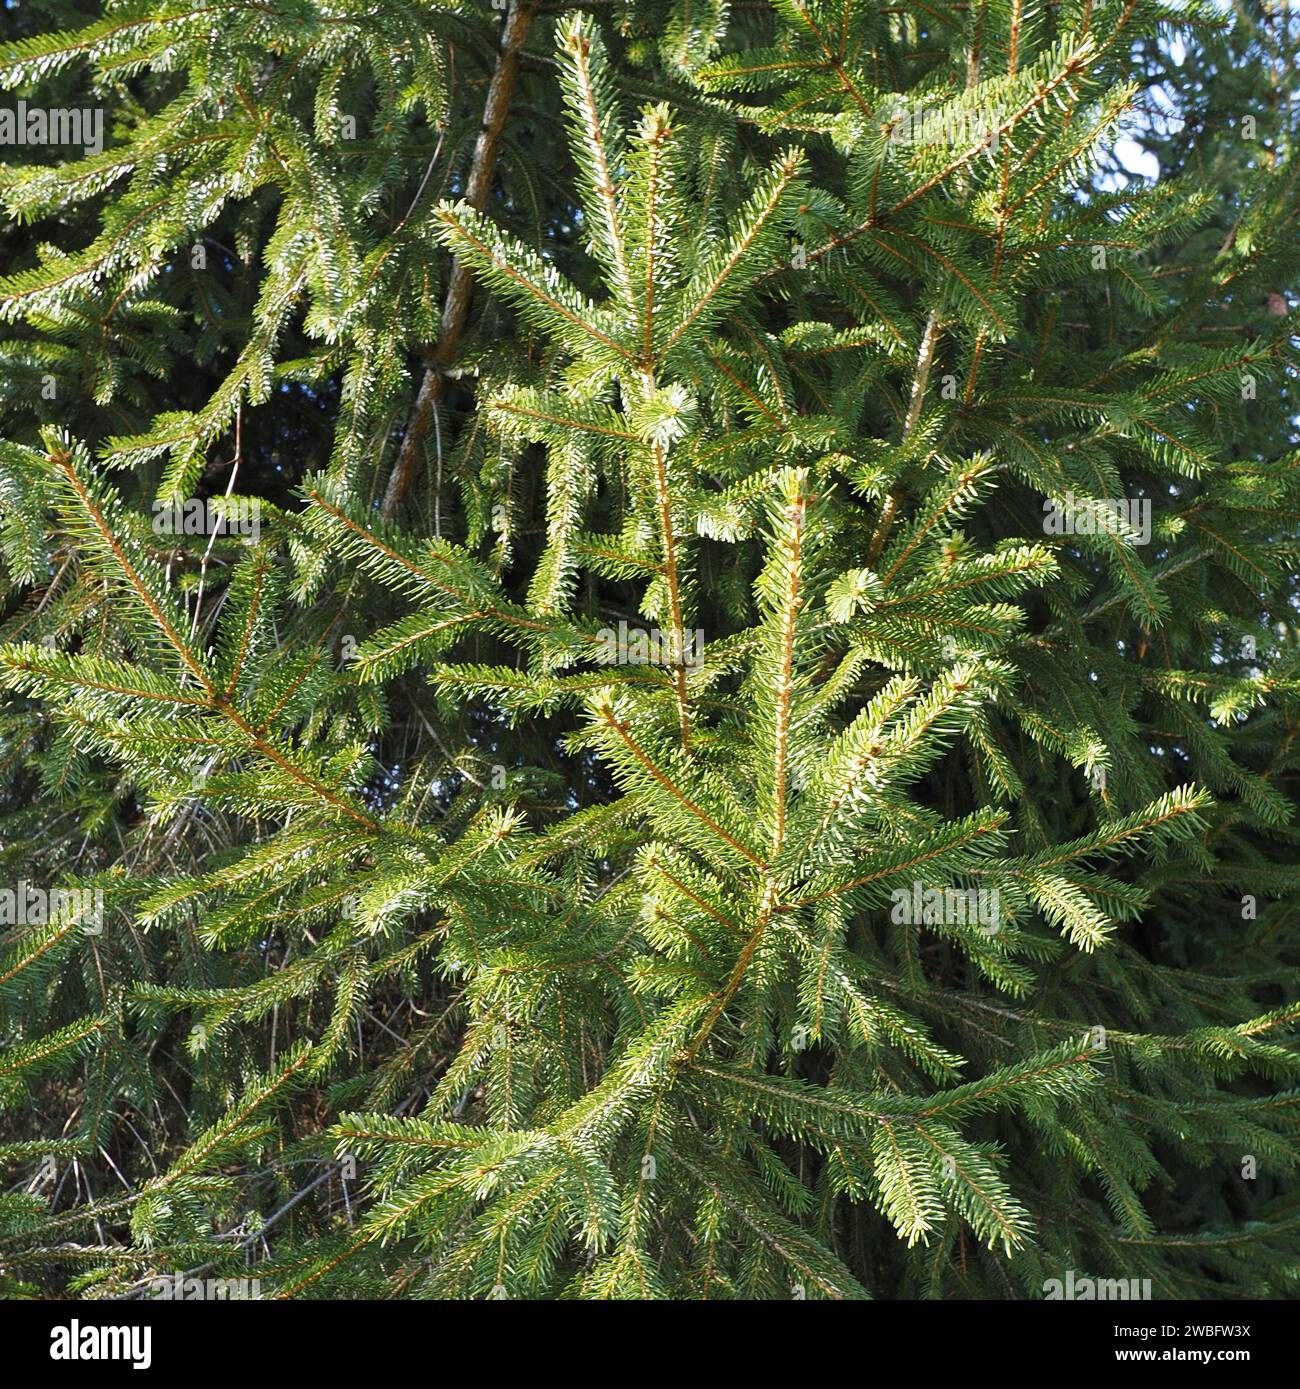 The evergreen stays green all through the year. Stock Photo